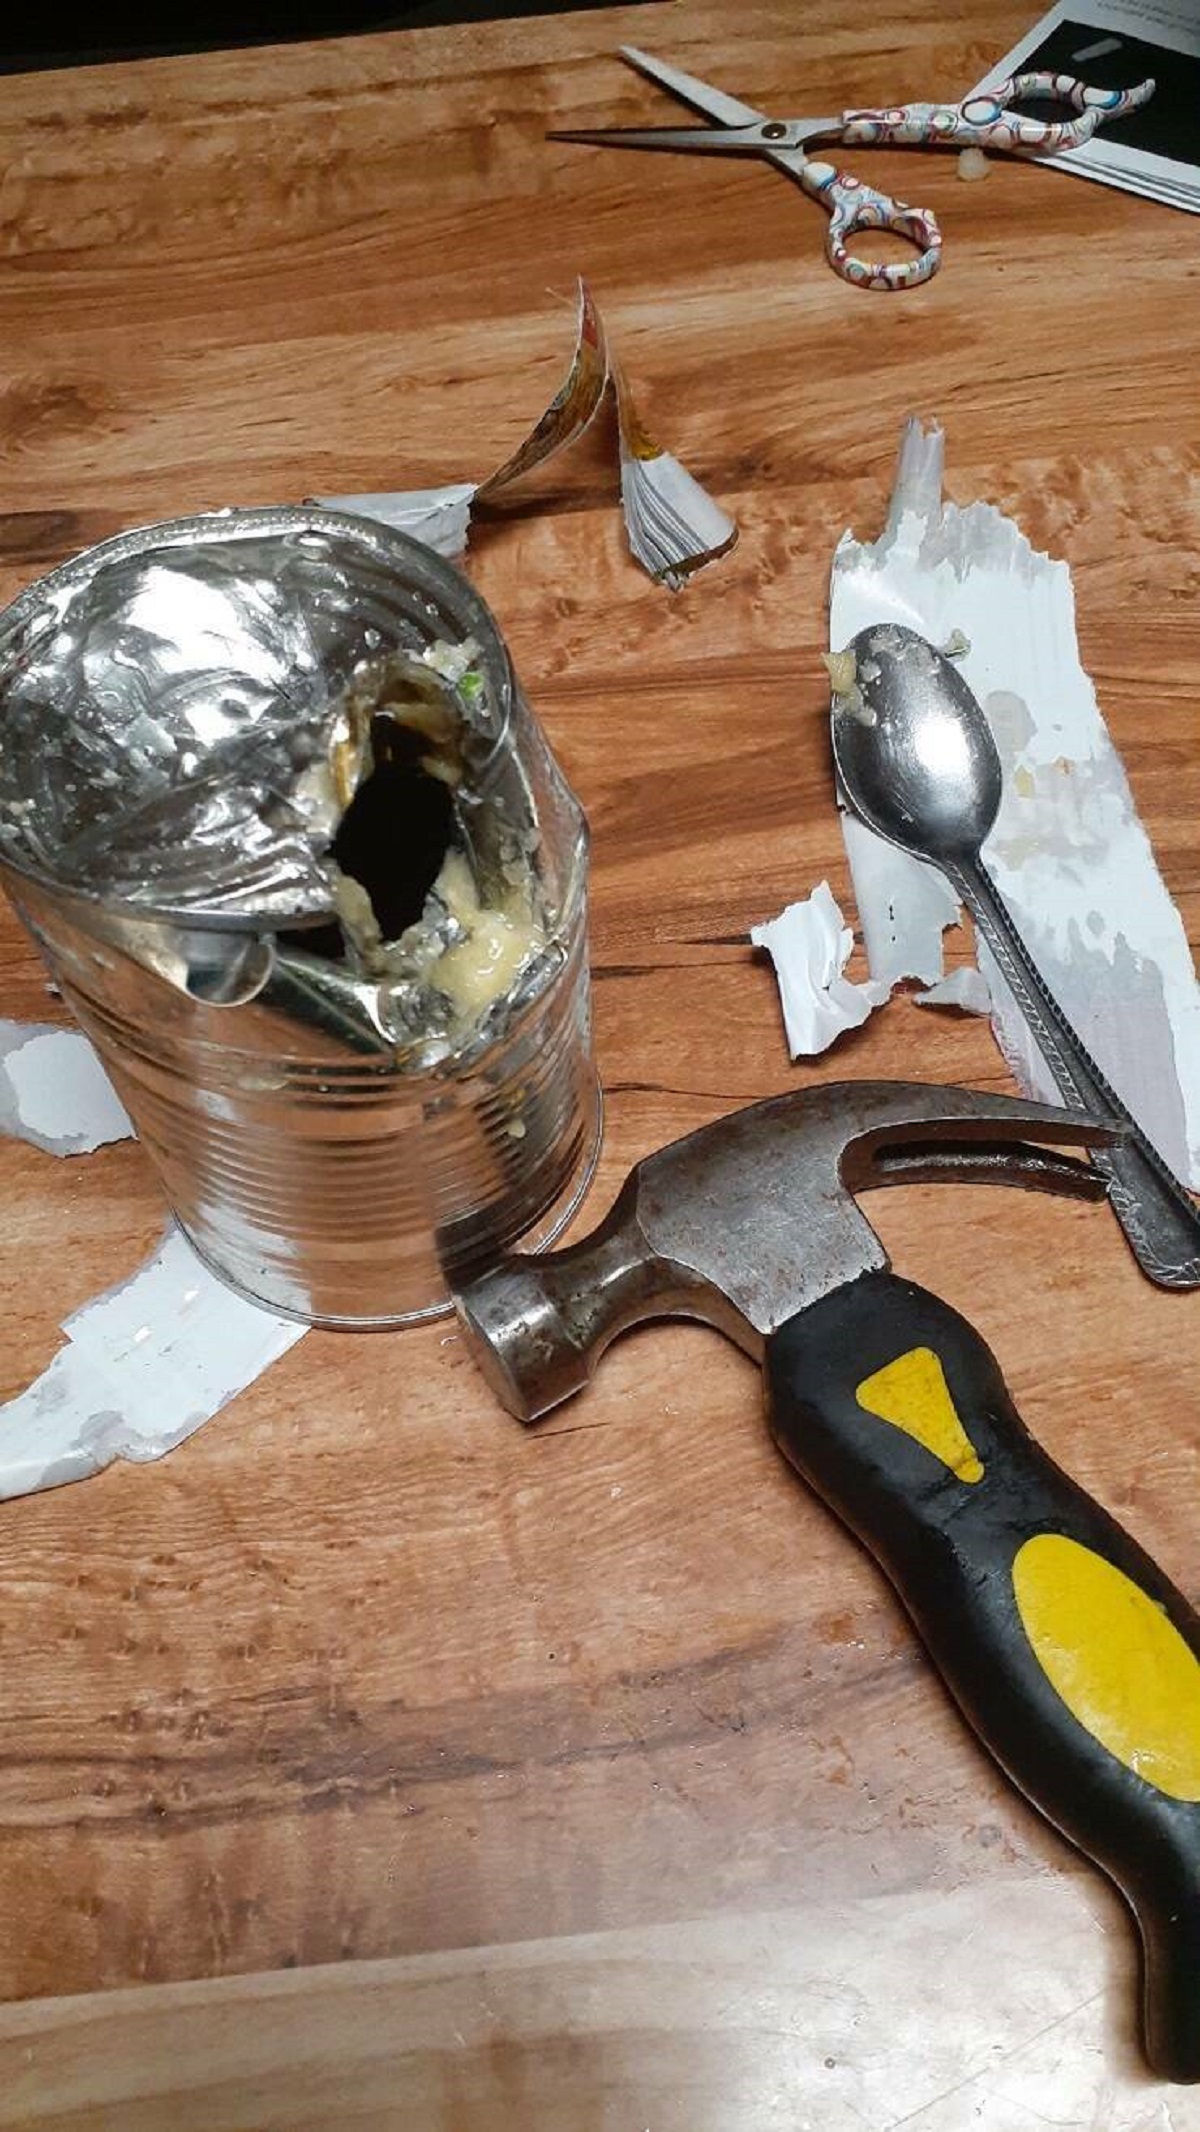 "Couldn't find the can opener."